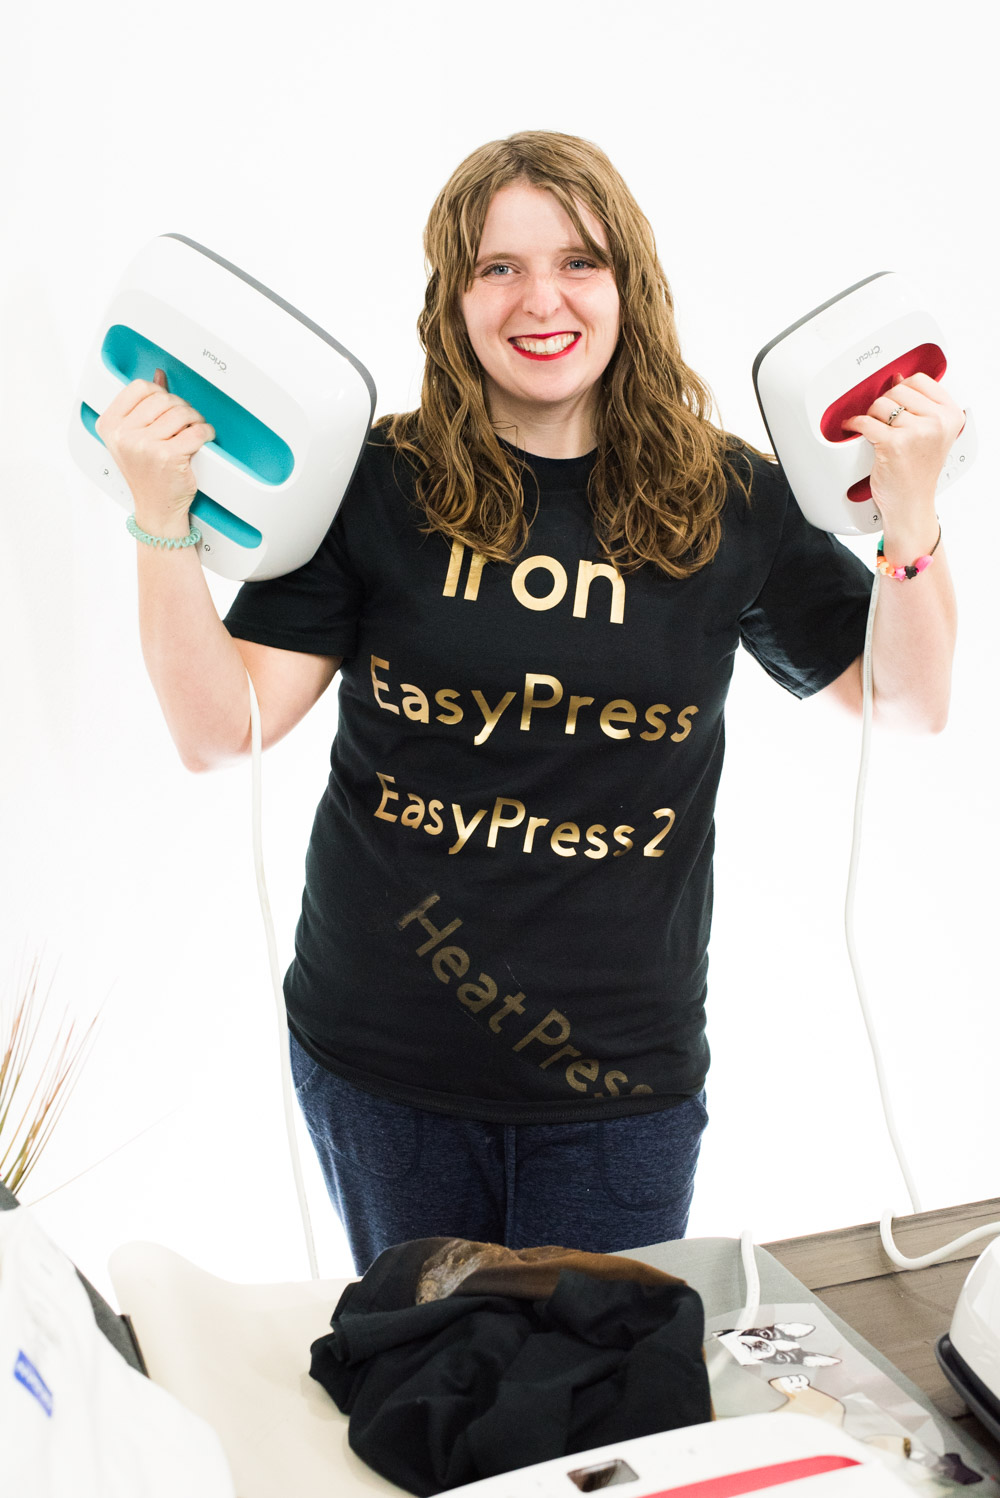 Katie standing with an original EasyPress and an EasyPress 2